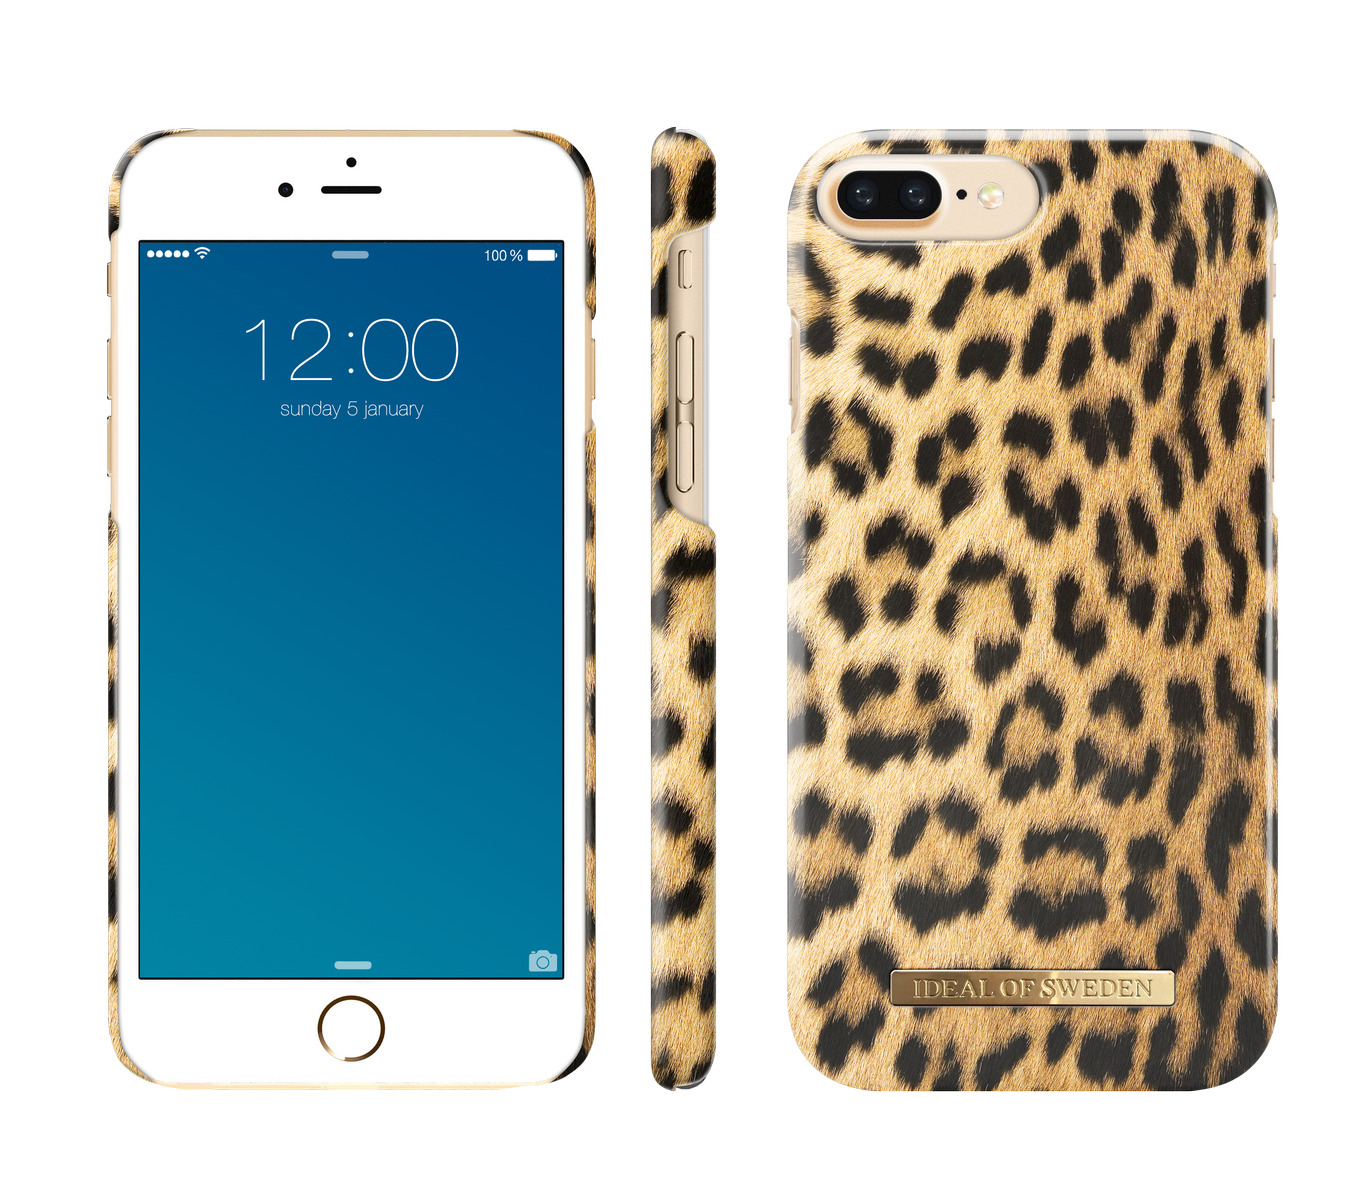 IDEAL OF SWEDEN Fashion, Backcover, Leopard Plus, Plus, 8 iPhone iPhone Wild ,iPhone 7 6 Plus Apple